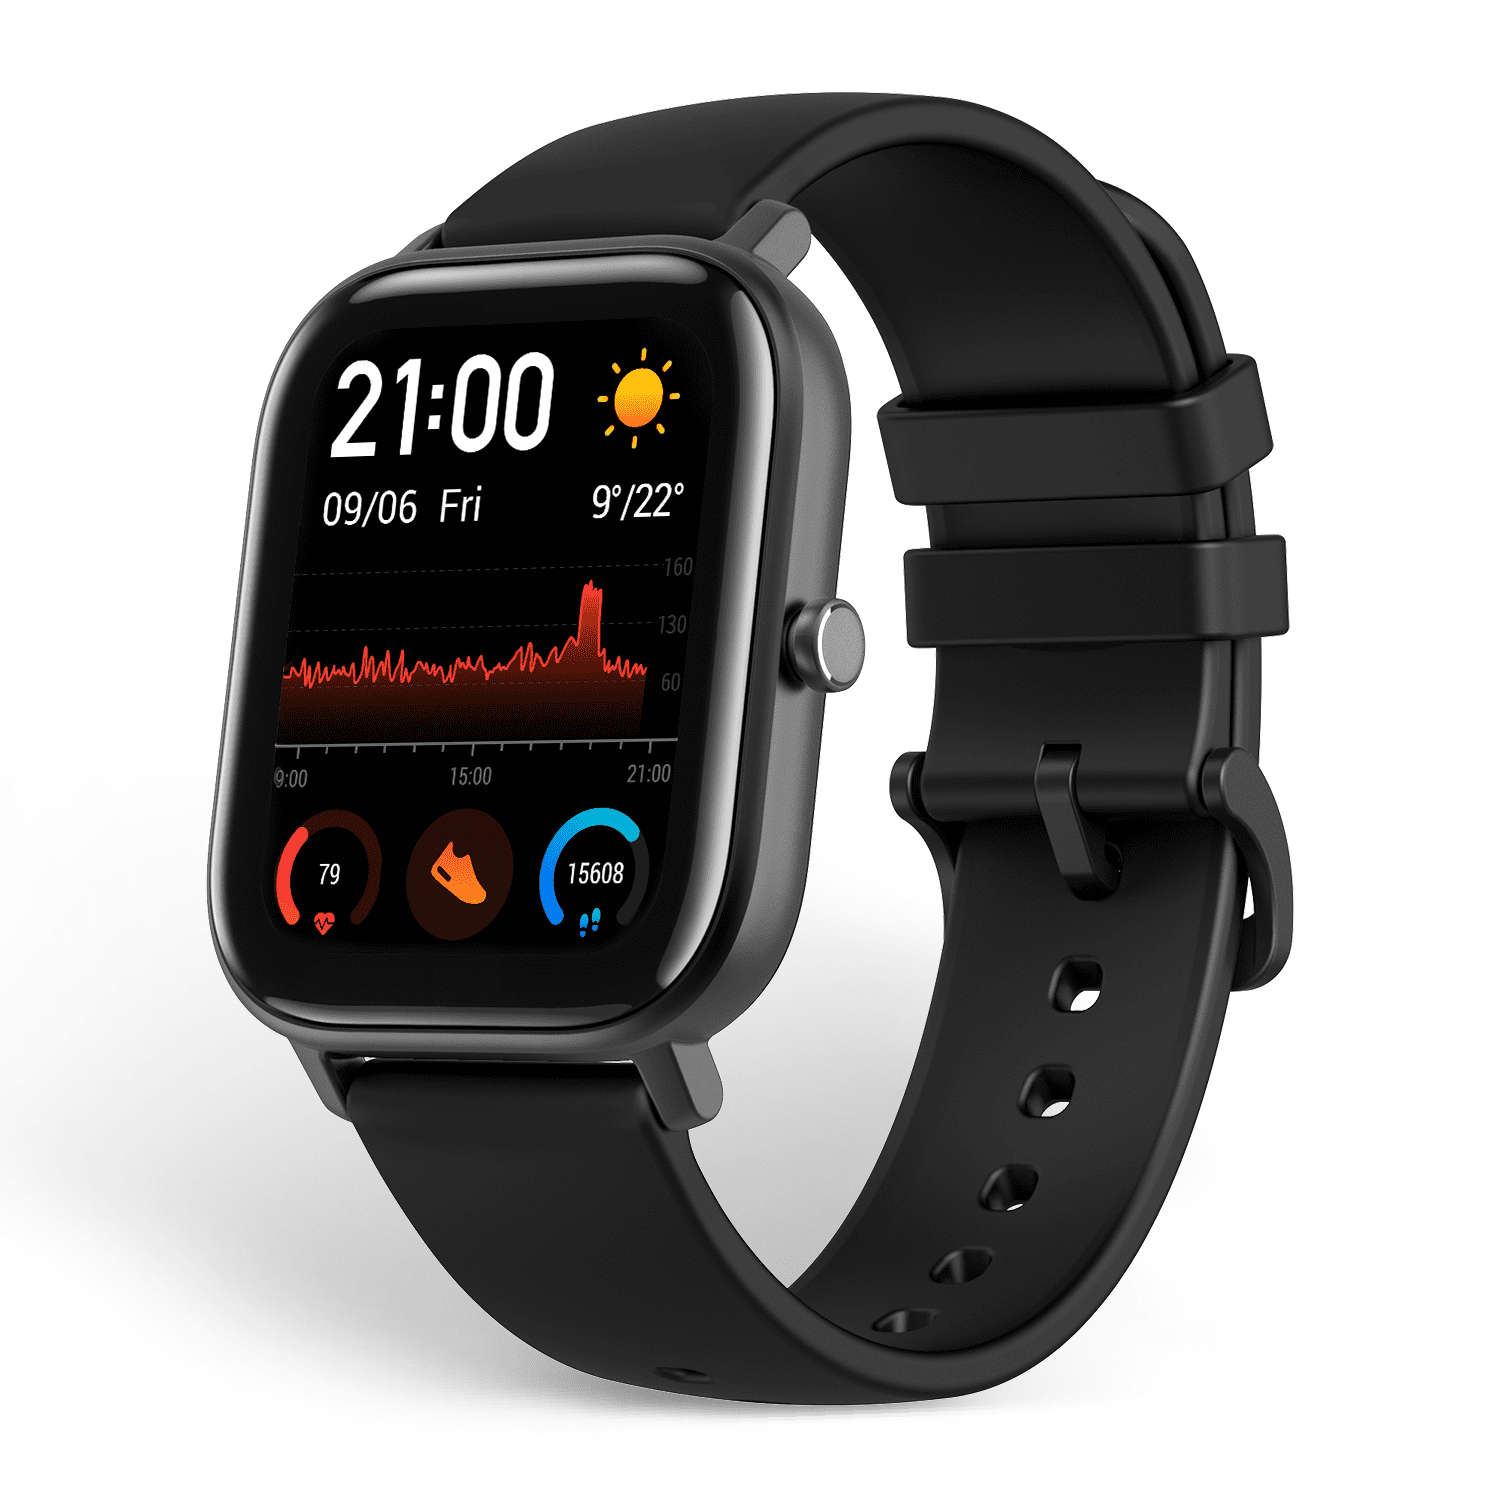 Amazfit GTS Fitness Smartwatch with Heart Rate Monitor, 14-Day Battery Life, Music Control, 1.65" Display, Sleep and Swim Tracking, GPS, Water Resistant, Smart Notifications, Obsidian Black